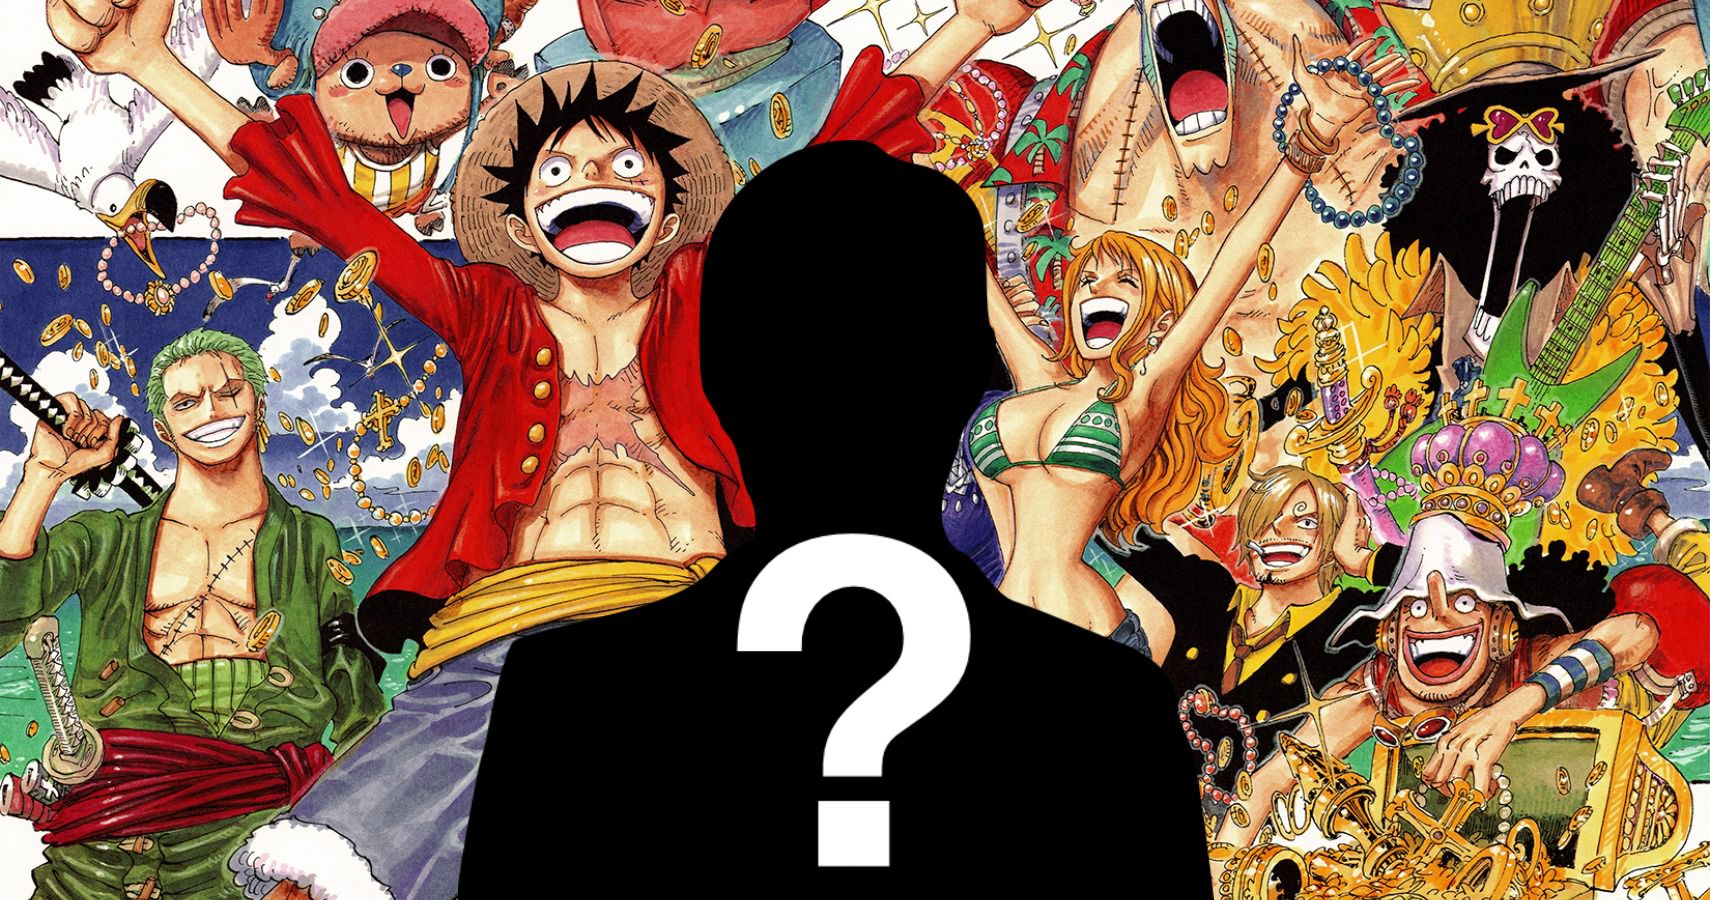 Who are the crew members in One Piece?